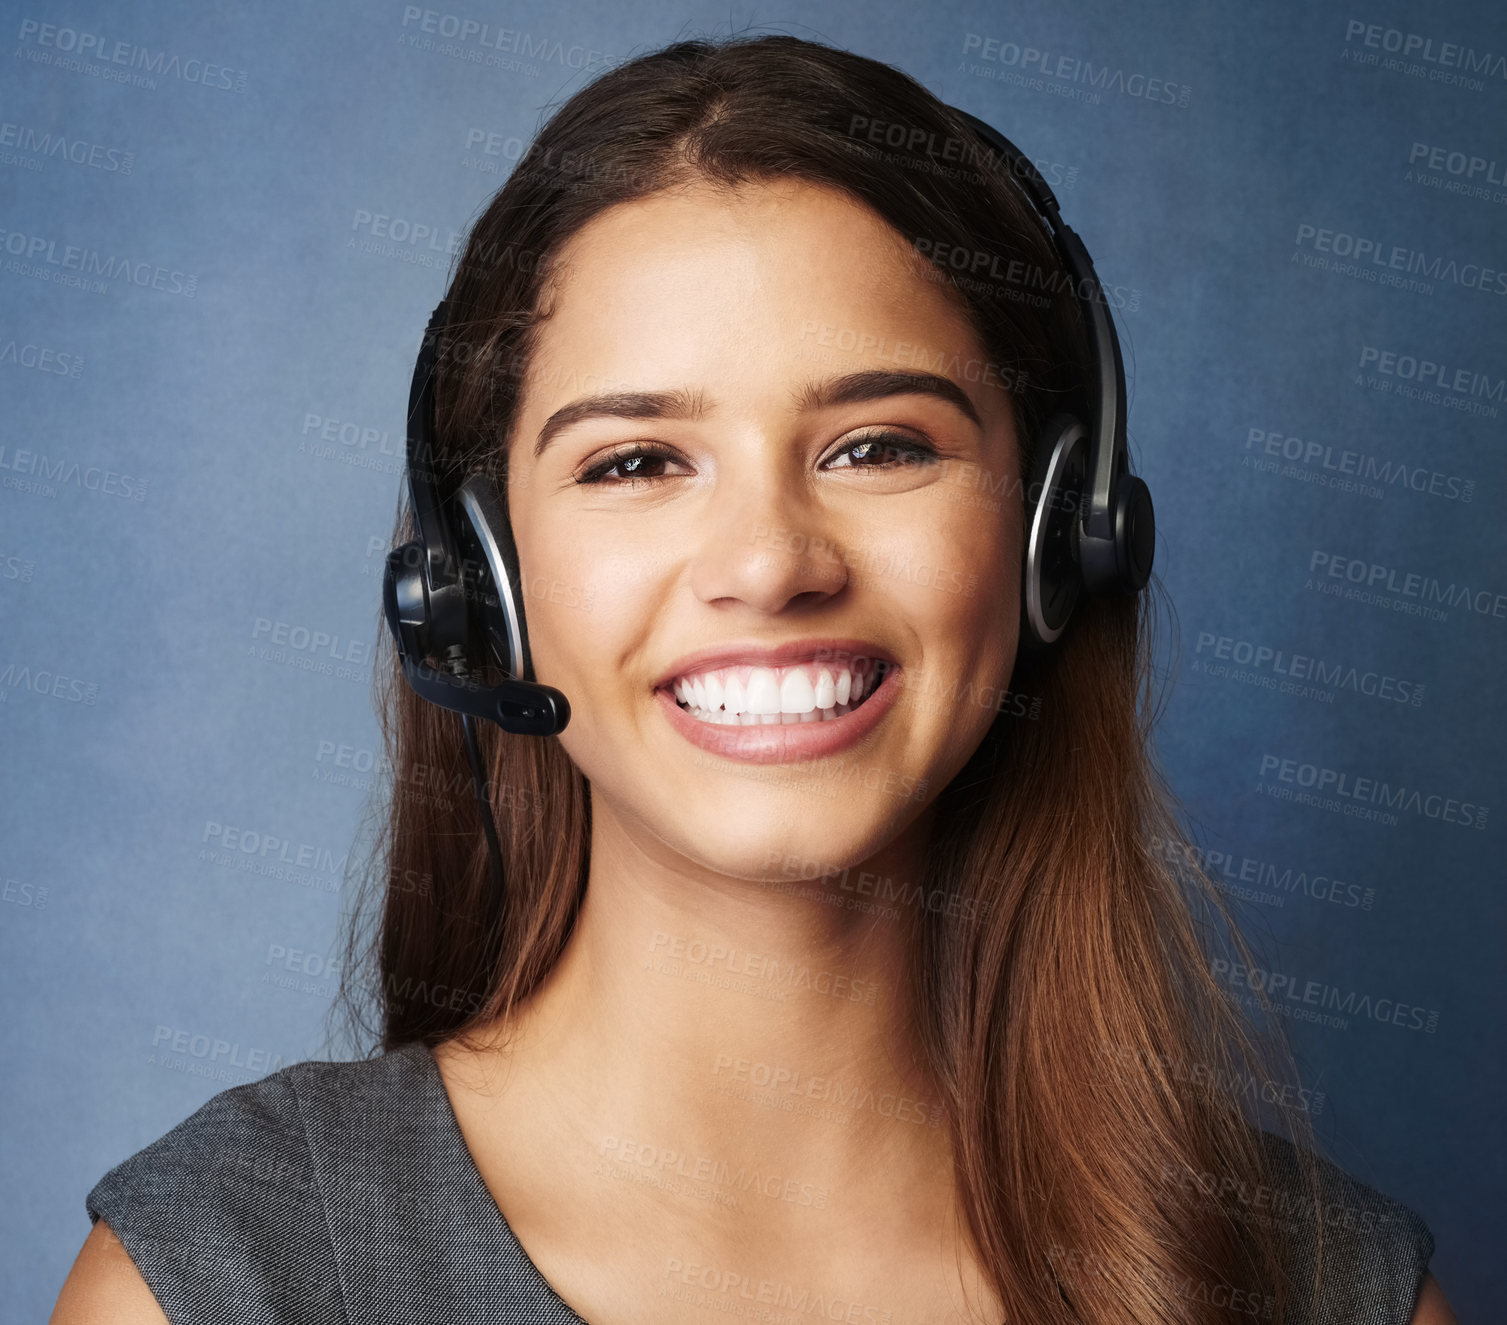 Buy stock photo Studio portrait of a professional young woman wearing a headset against a gray background